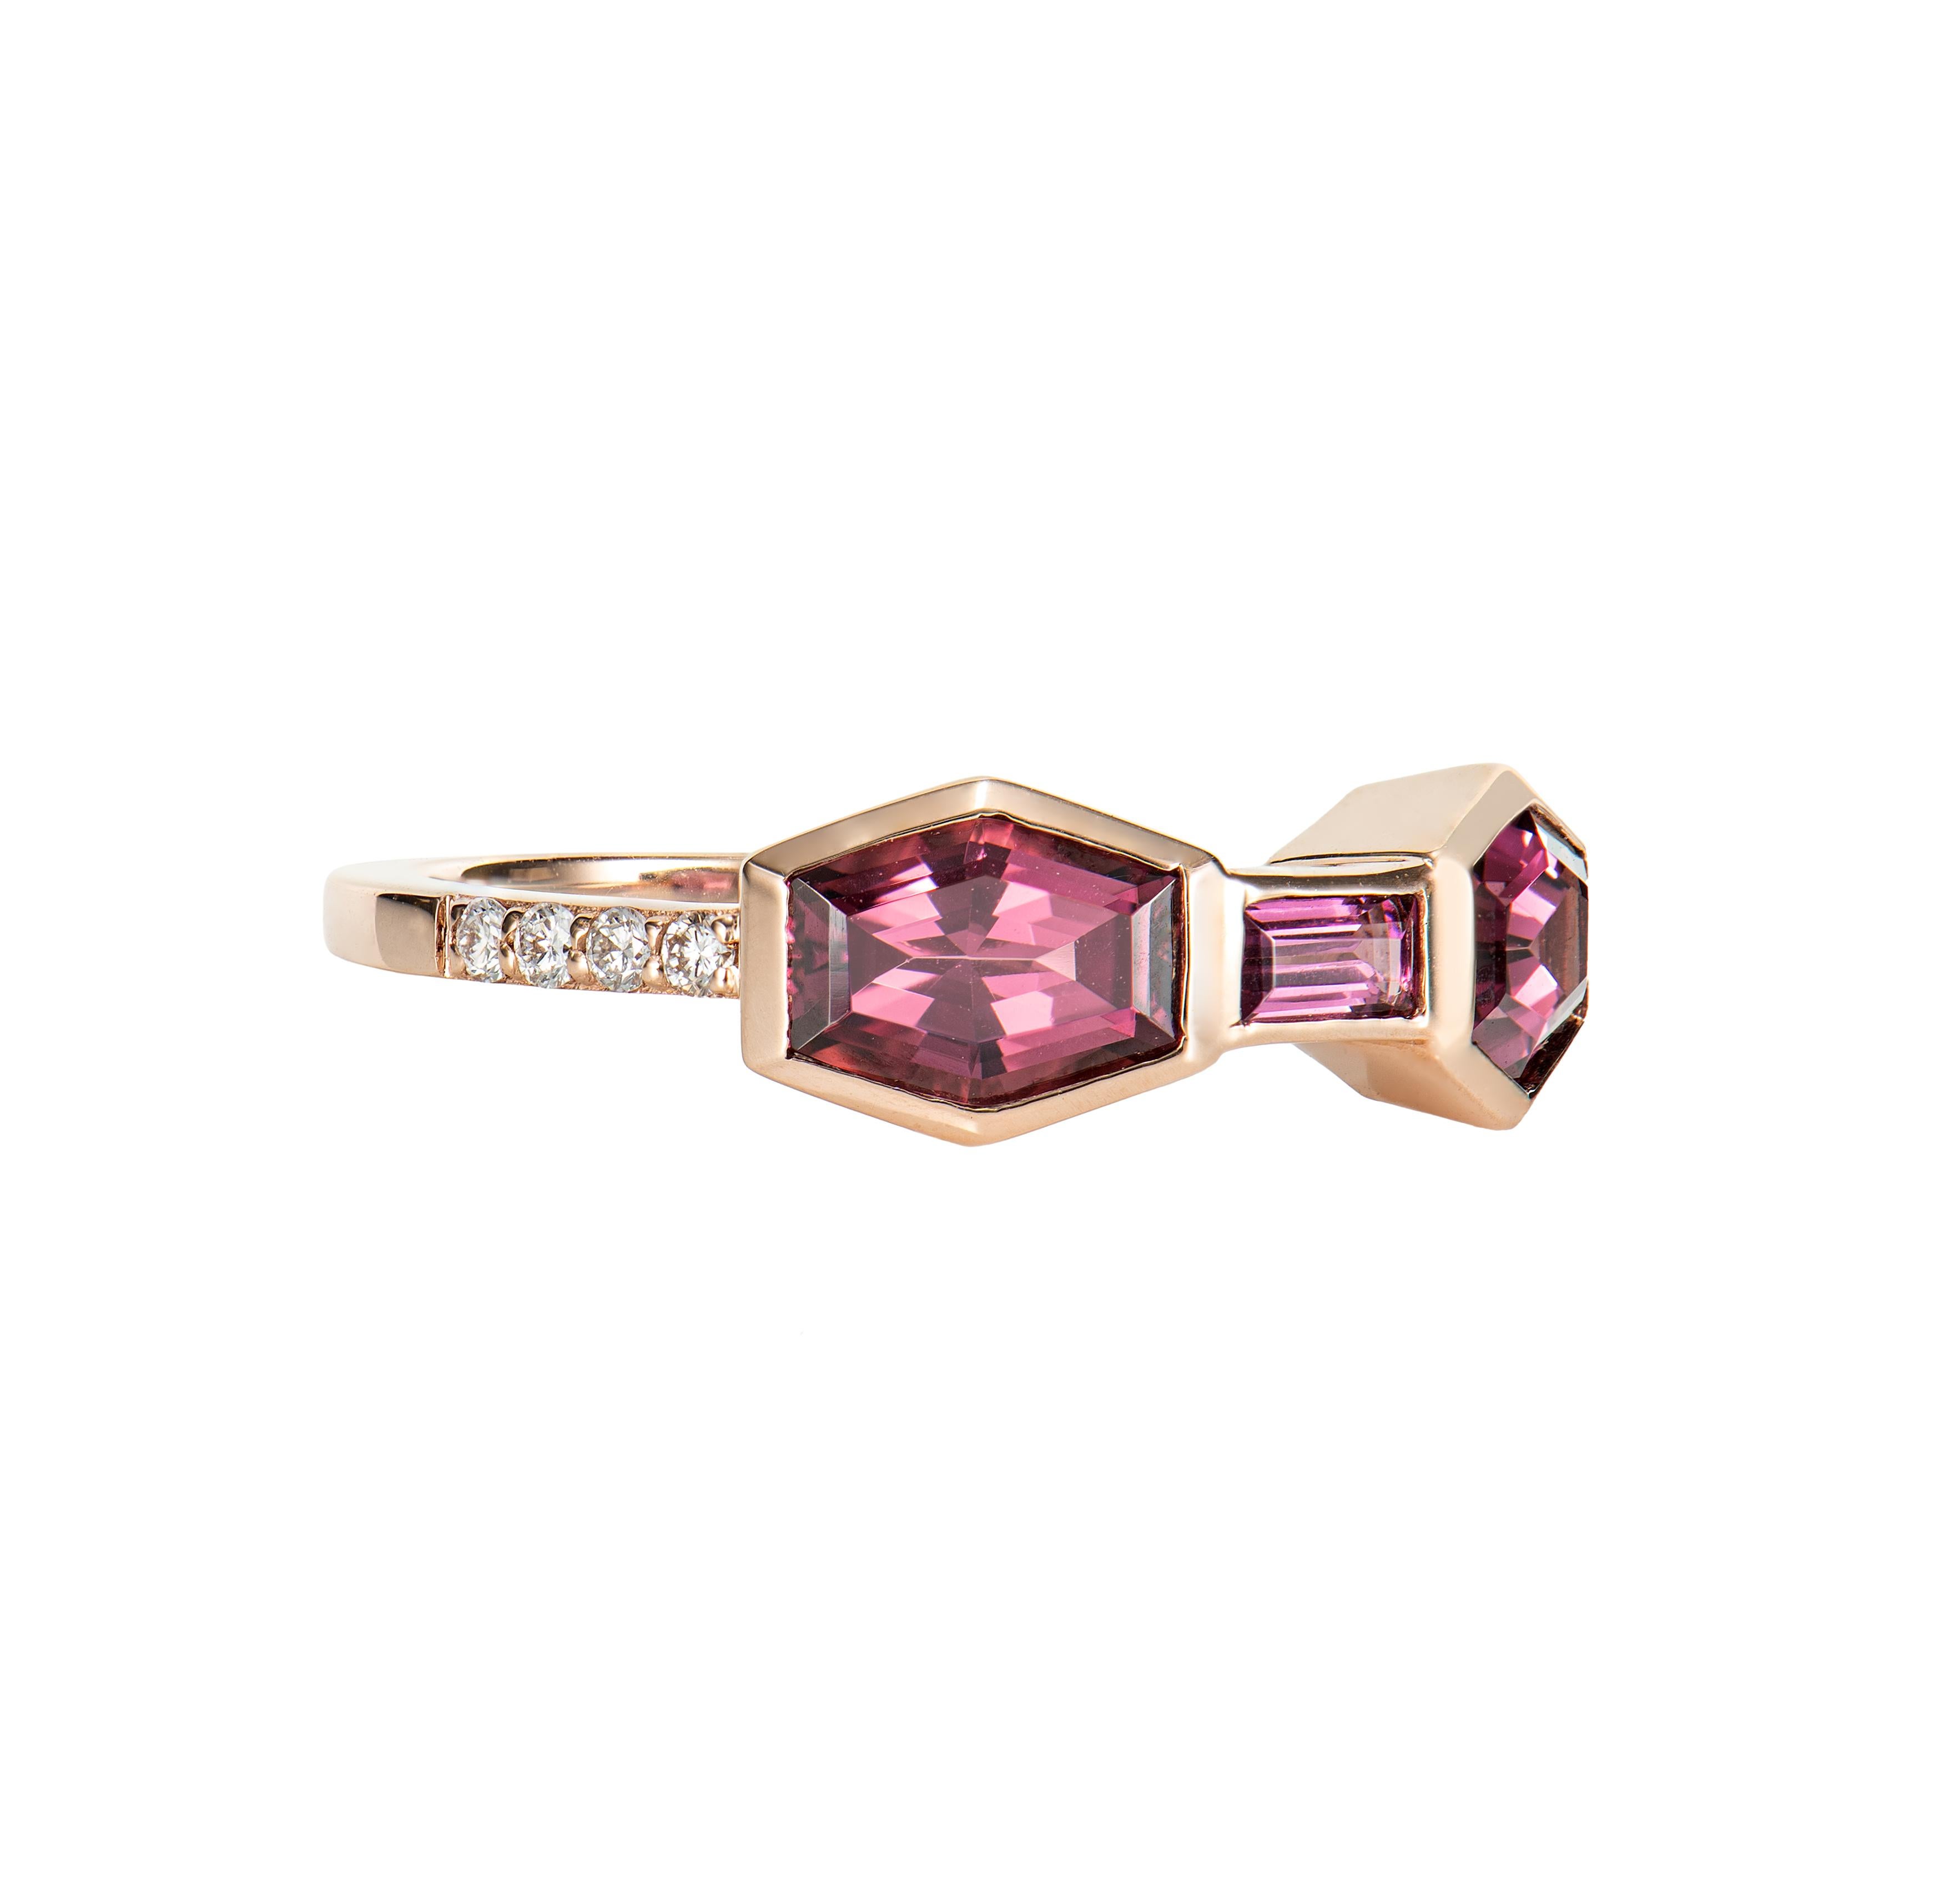 It is a Fancy Rhodolite Ring in Hexagon shape with Red Pink Purplish hue. This rose gold Ring have a timeless, elegant appearance and can be worn on different occasions.

Rhodolite Ring in 14Karat Rose Gold with White Diamond.

Rhodolite: 2.18